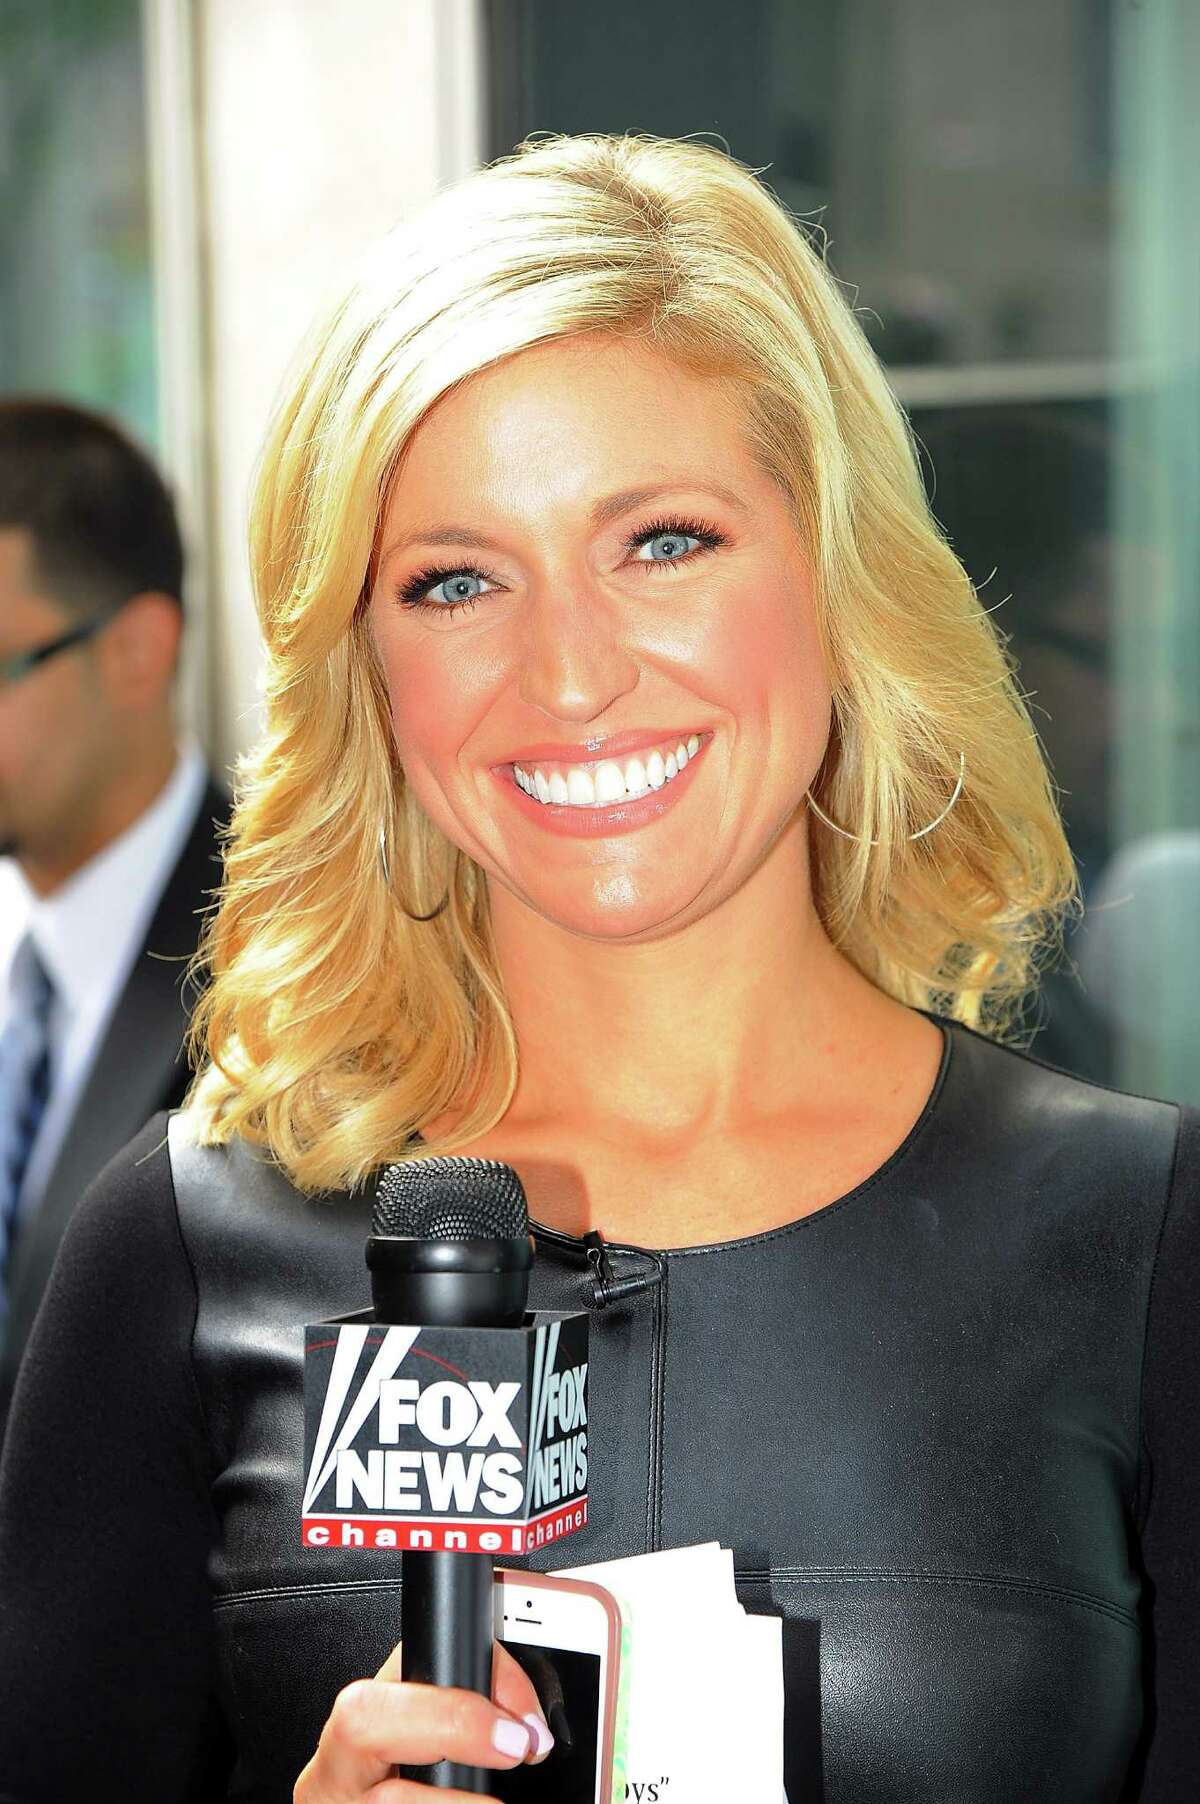 Ainsley Earhardt attends Trace Adkins performance on "FOX & Friends" All American Concert Series outside of FOX Studios on August 1, 2014 in New York City.